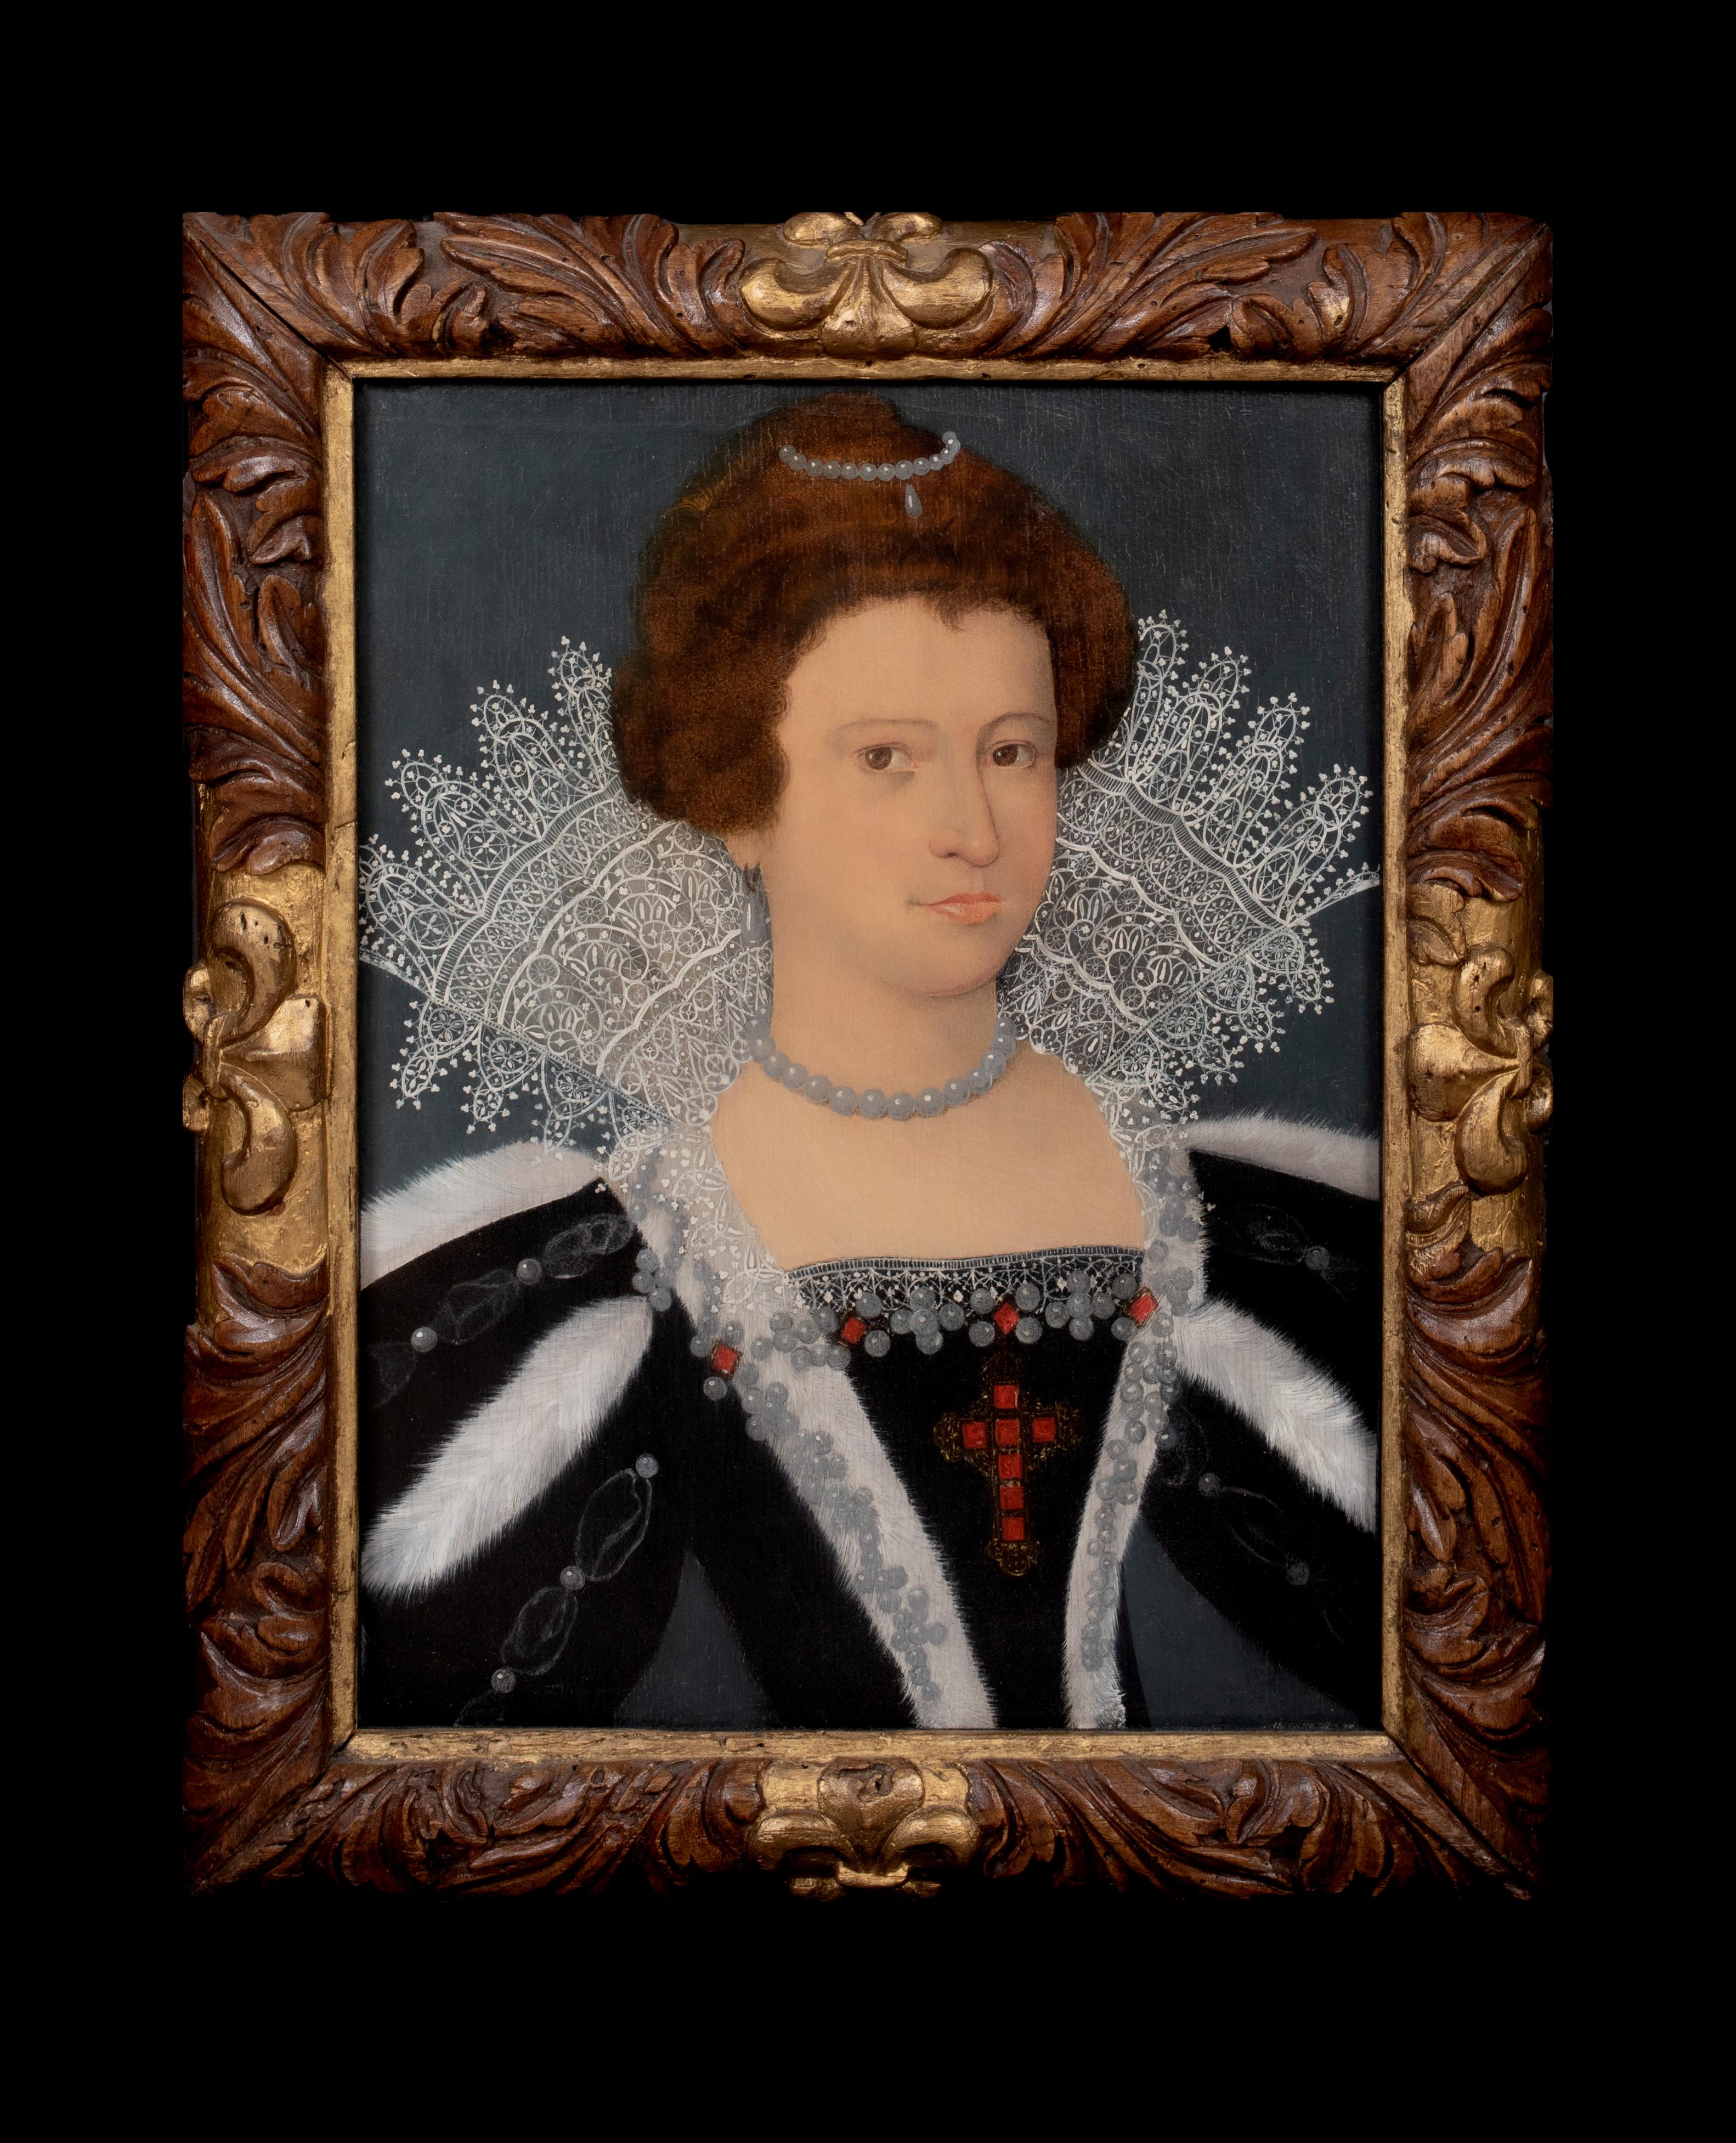 Portrait Of A Queen Elizabeth I Of England (1533-1603), 16th Century   - Painting by Unknown